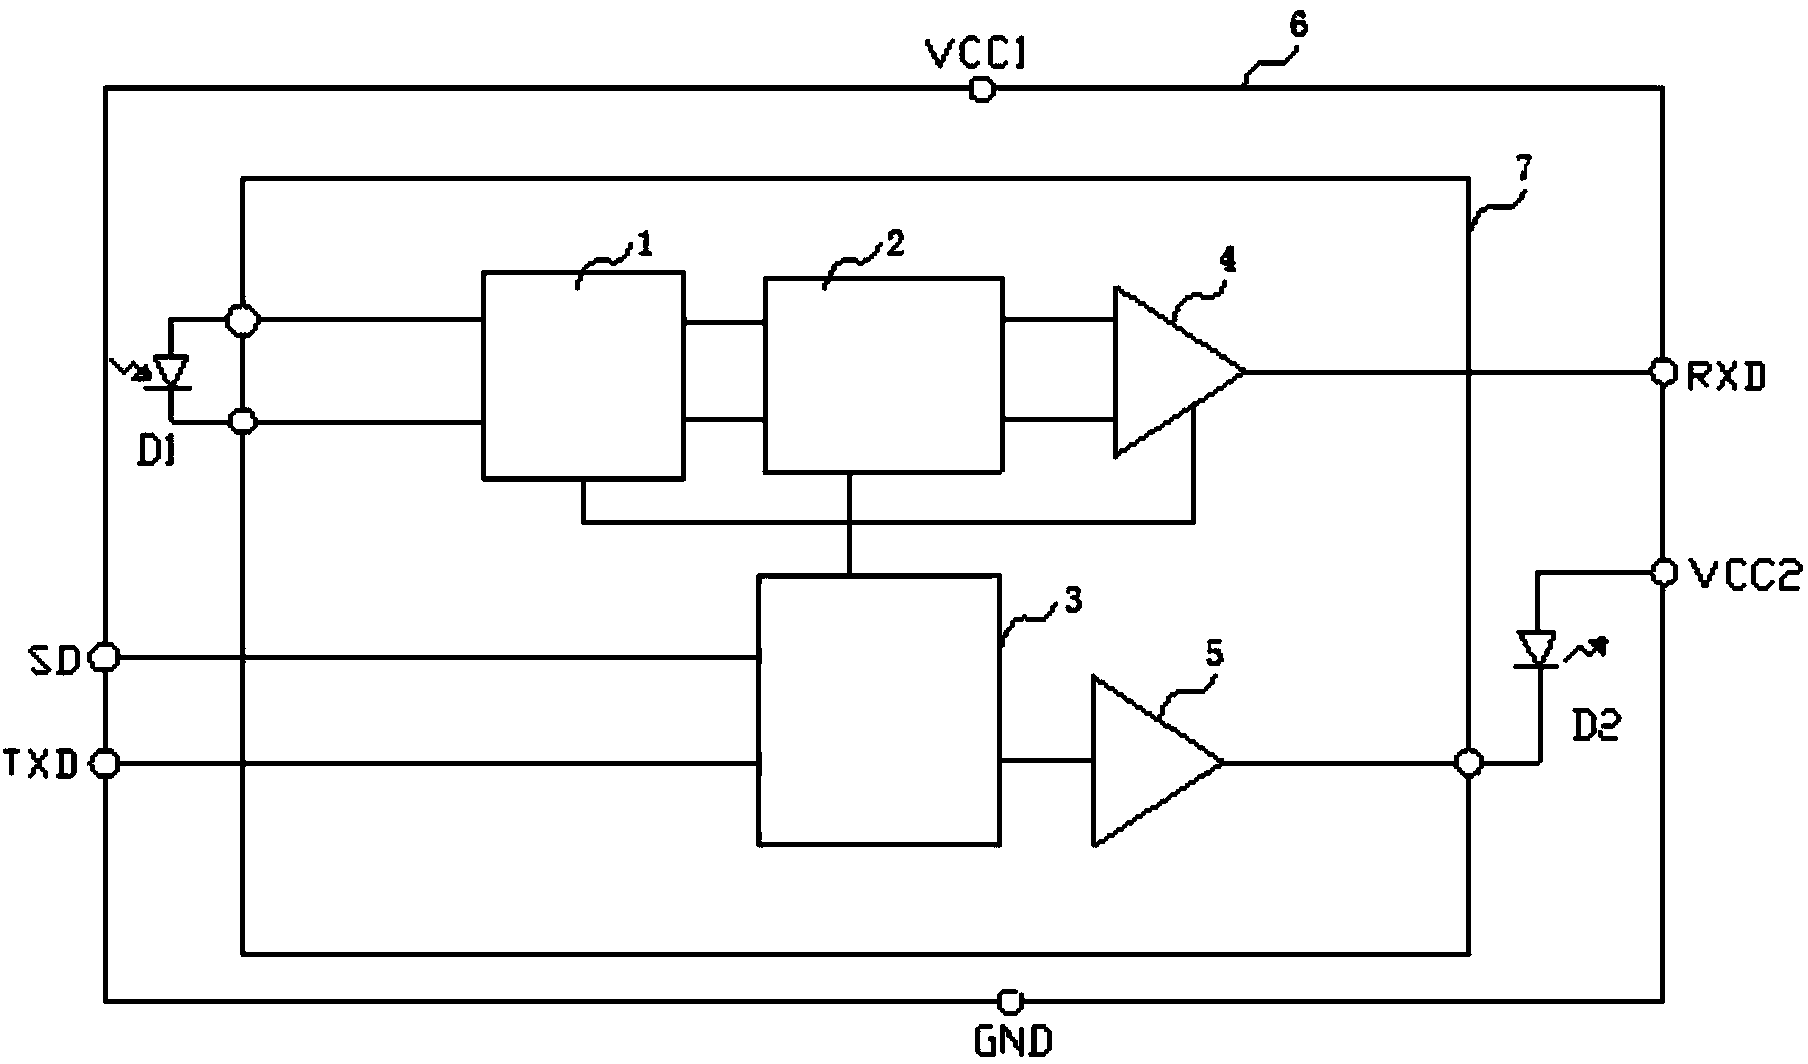 Optical communication circuit of functional modules and controllers in DCS (data transmission system) control system